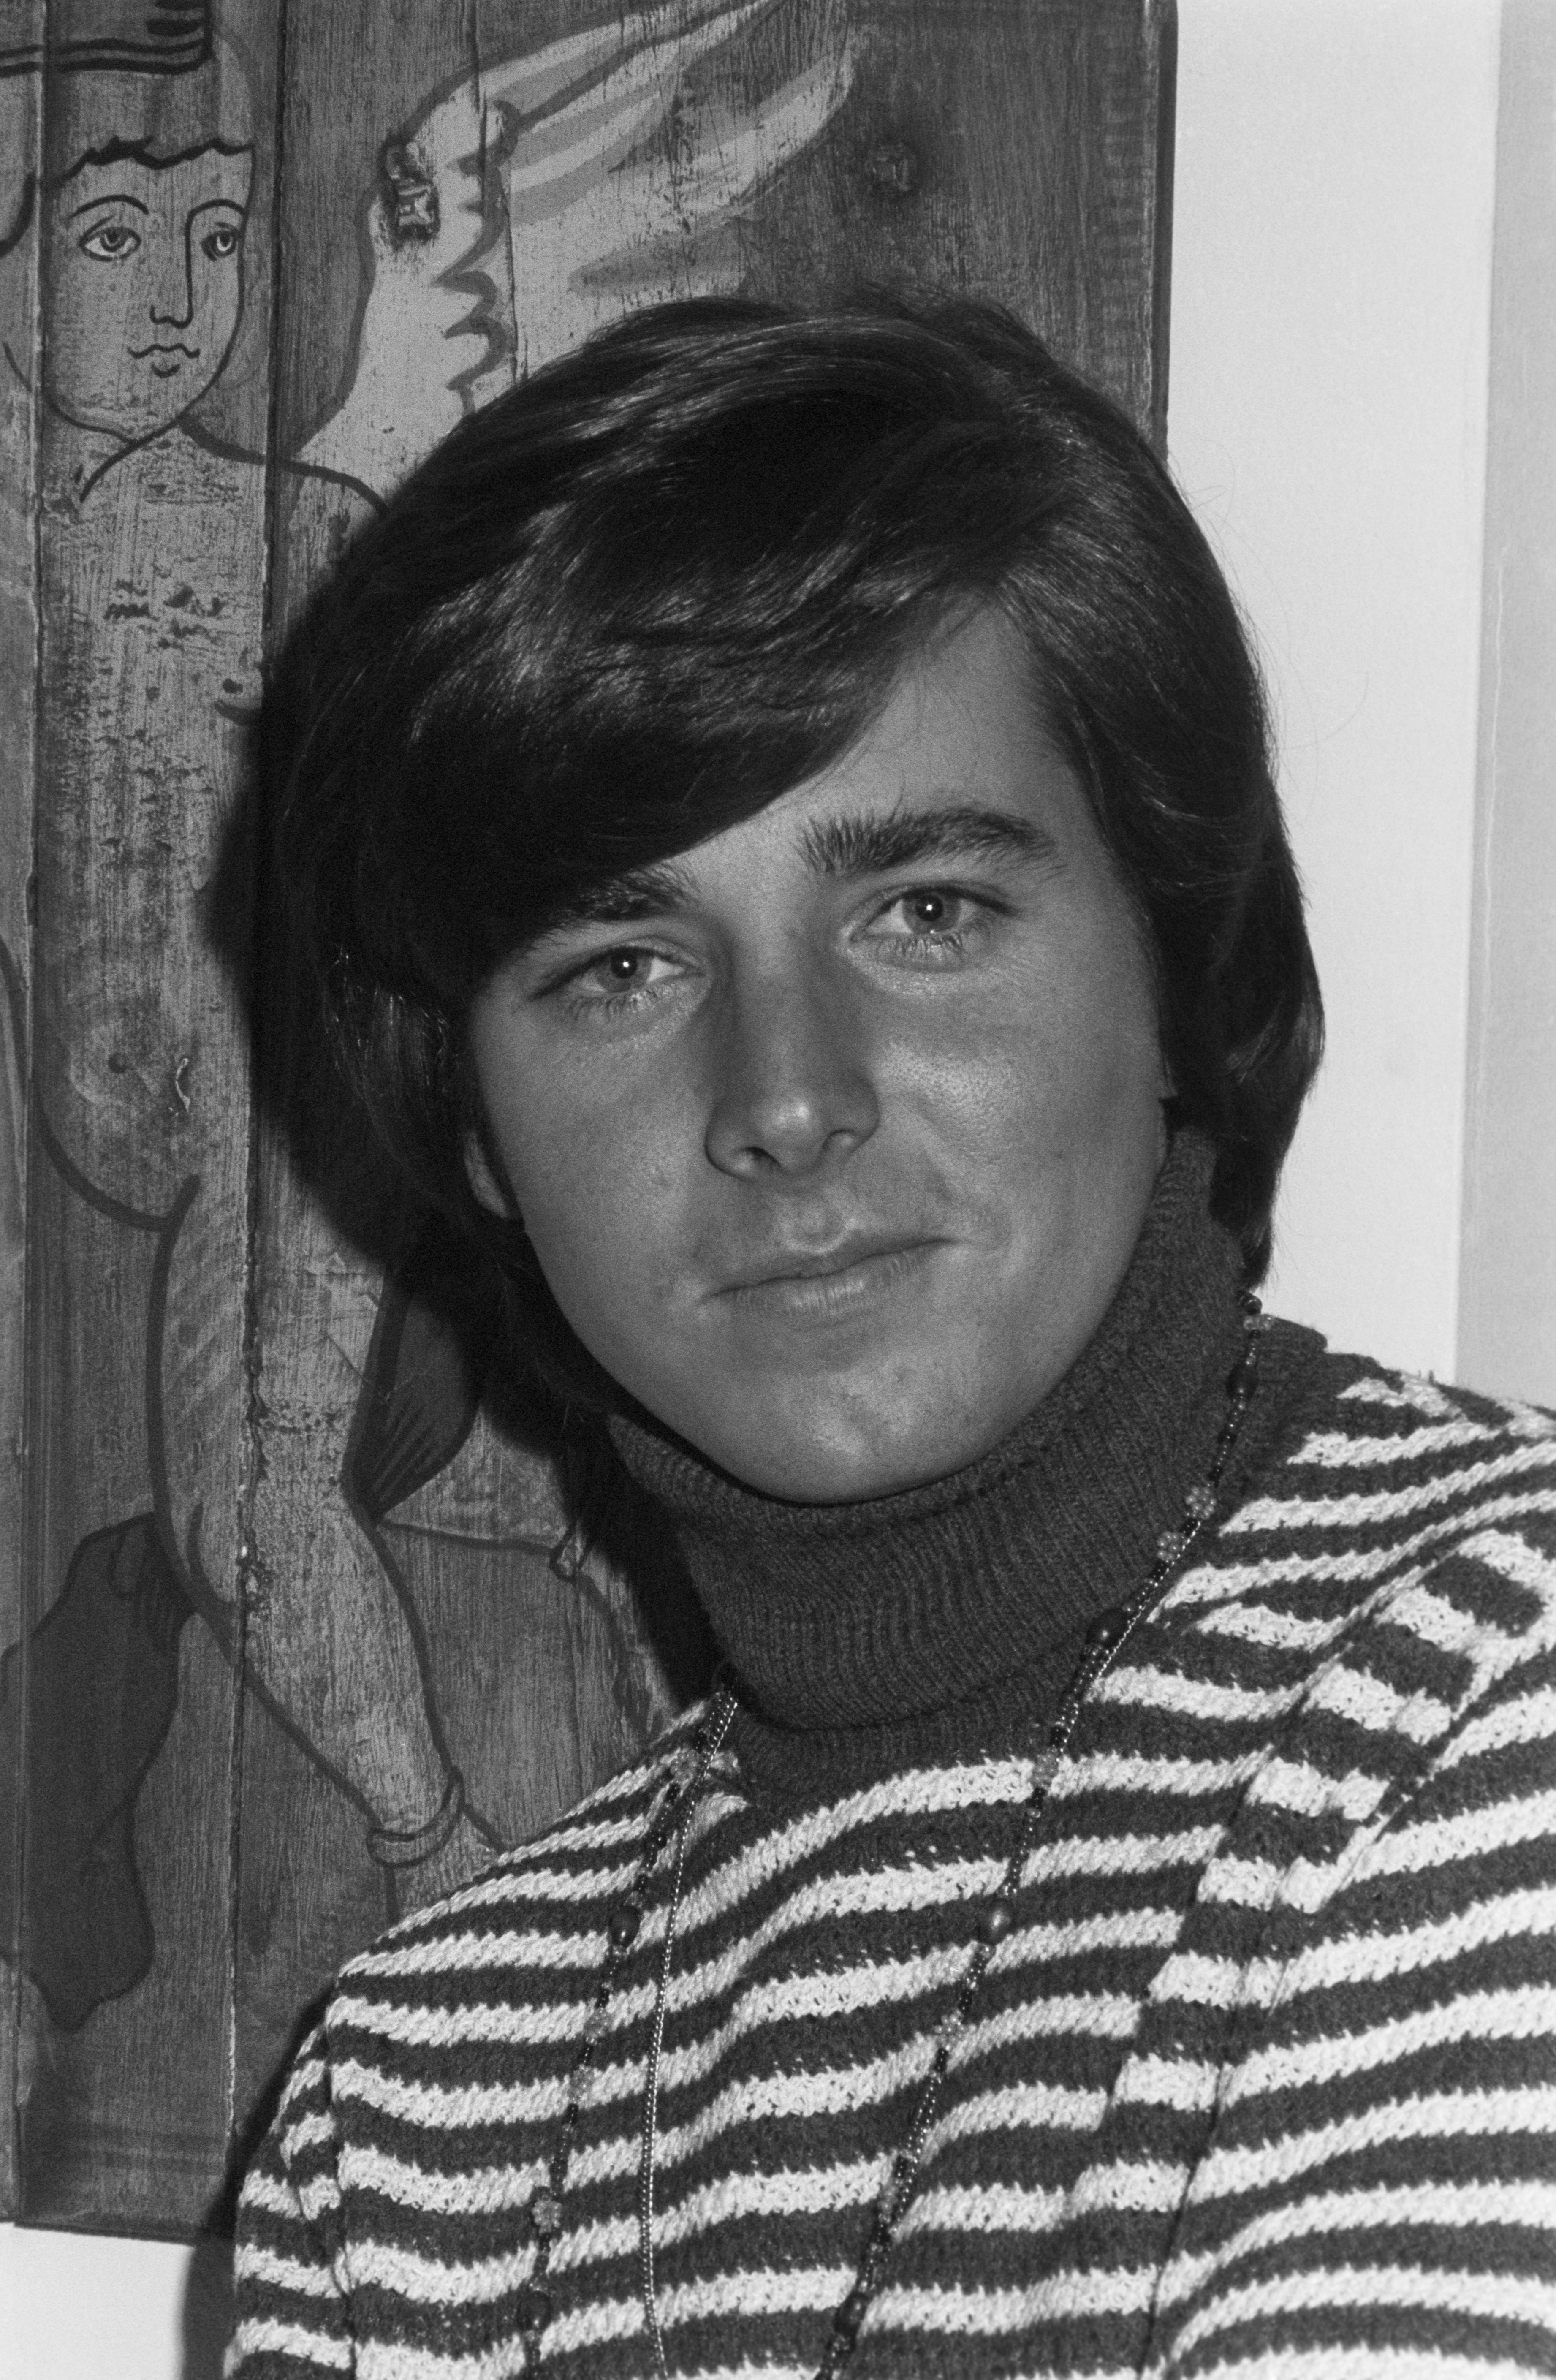 Bobby Sherman wearing a striped sweater; circa 1970; New York. | Source: Getty Images